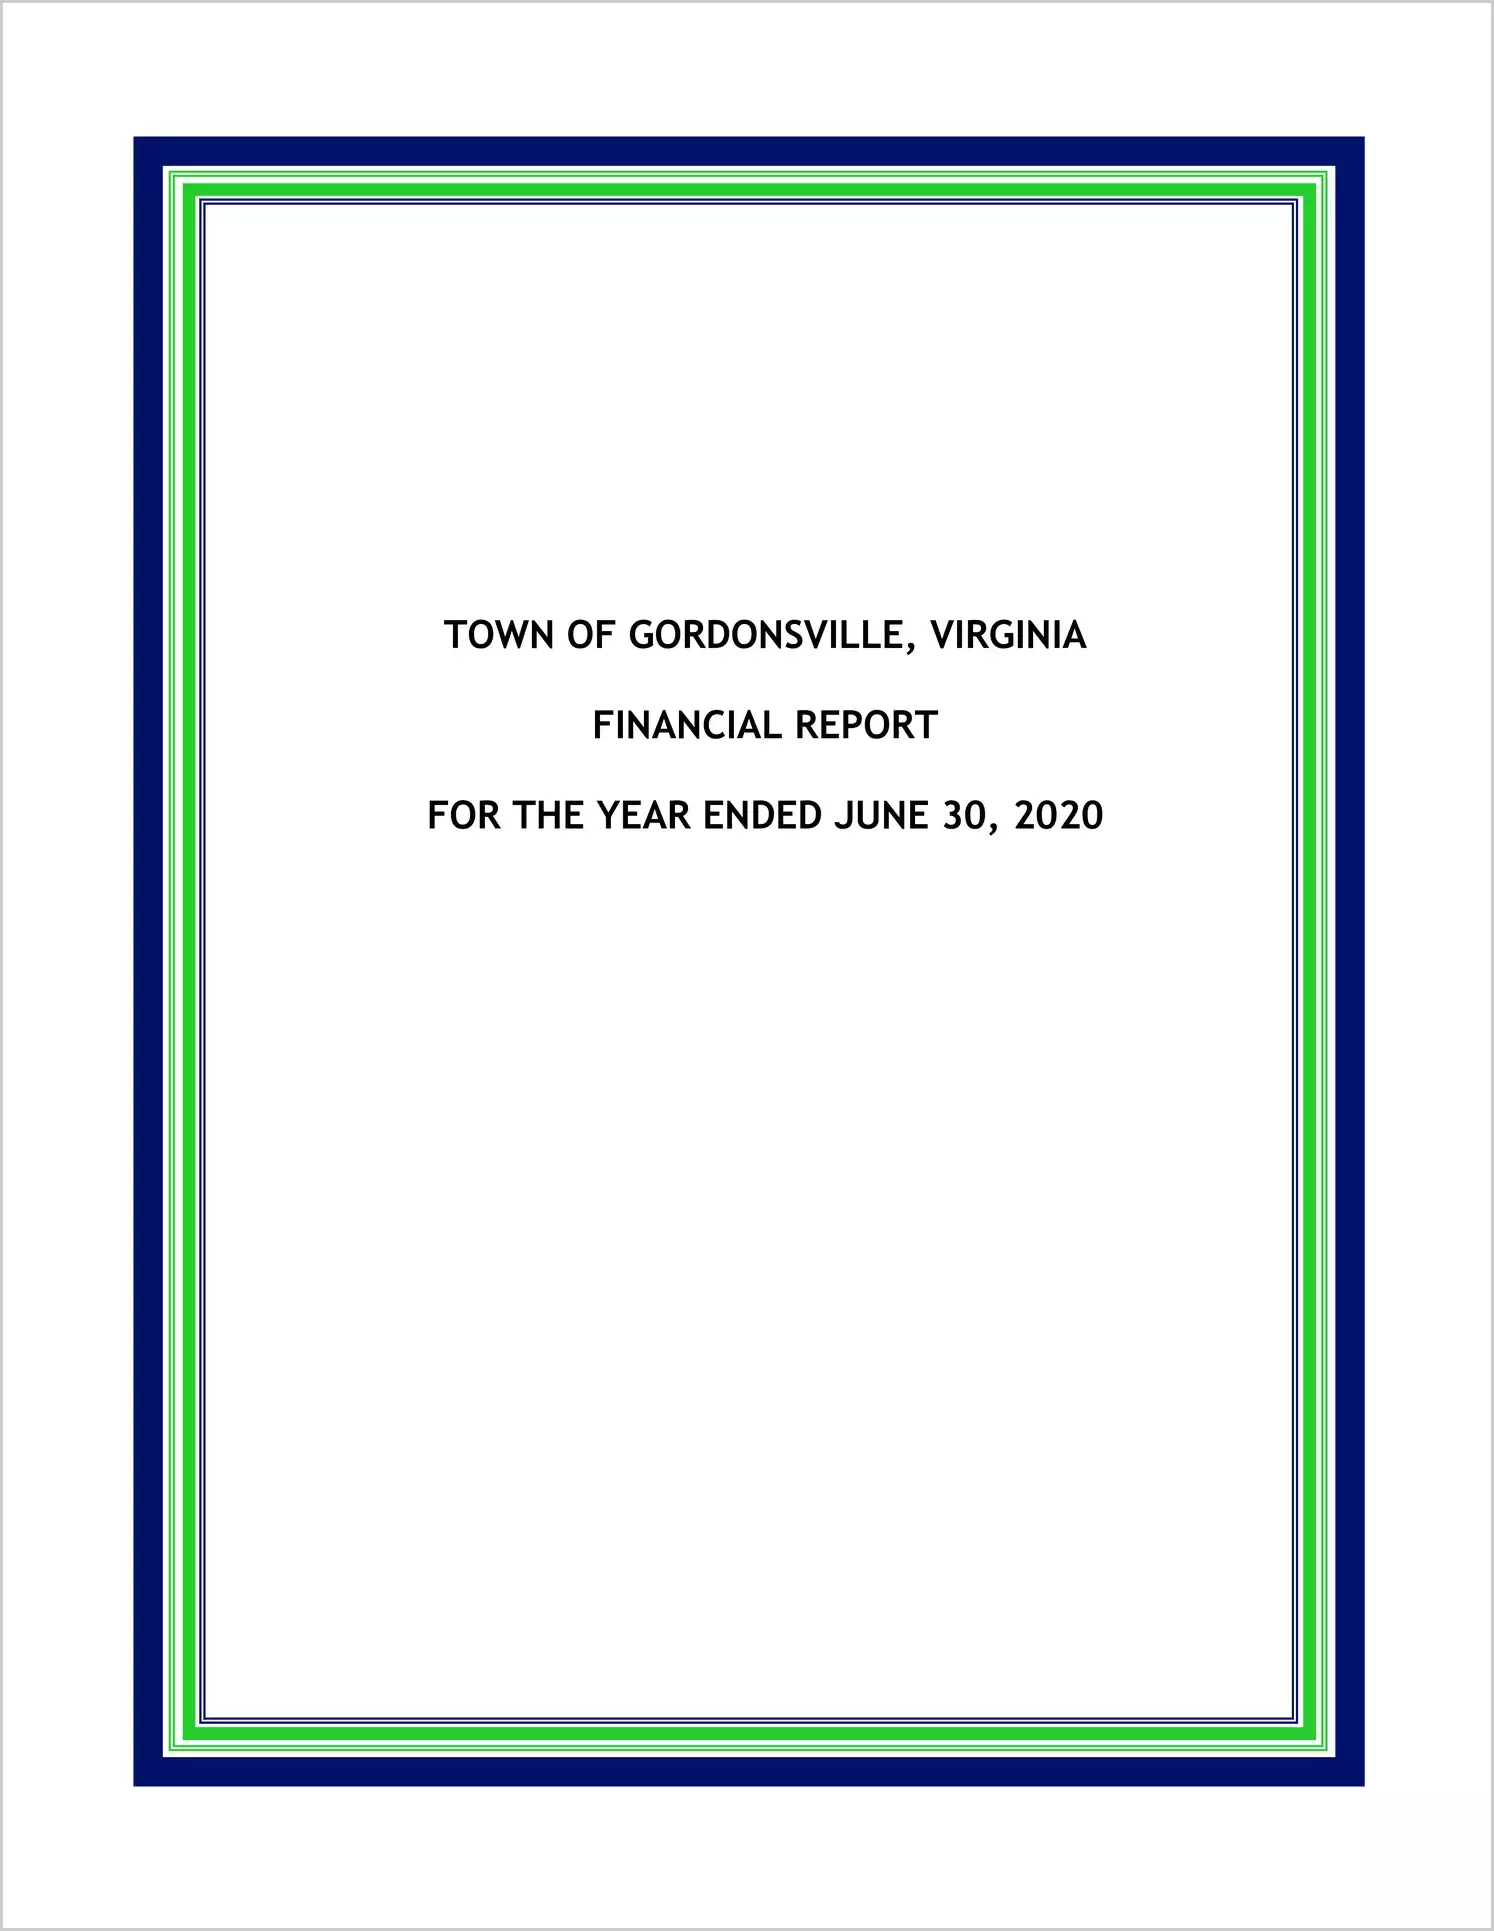 2020 Annual Financial Report-Small Town for Town of Gordonsville